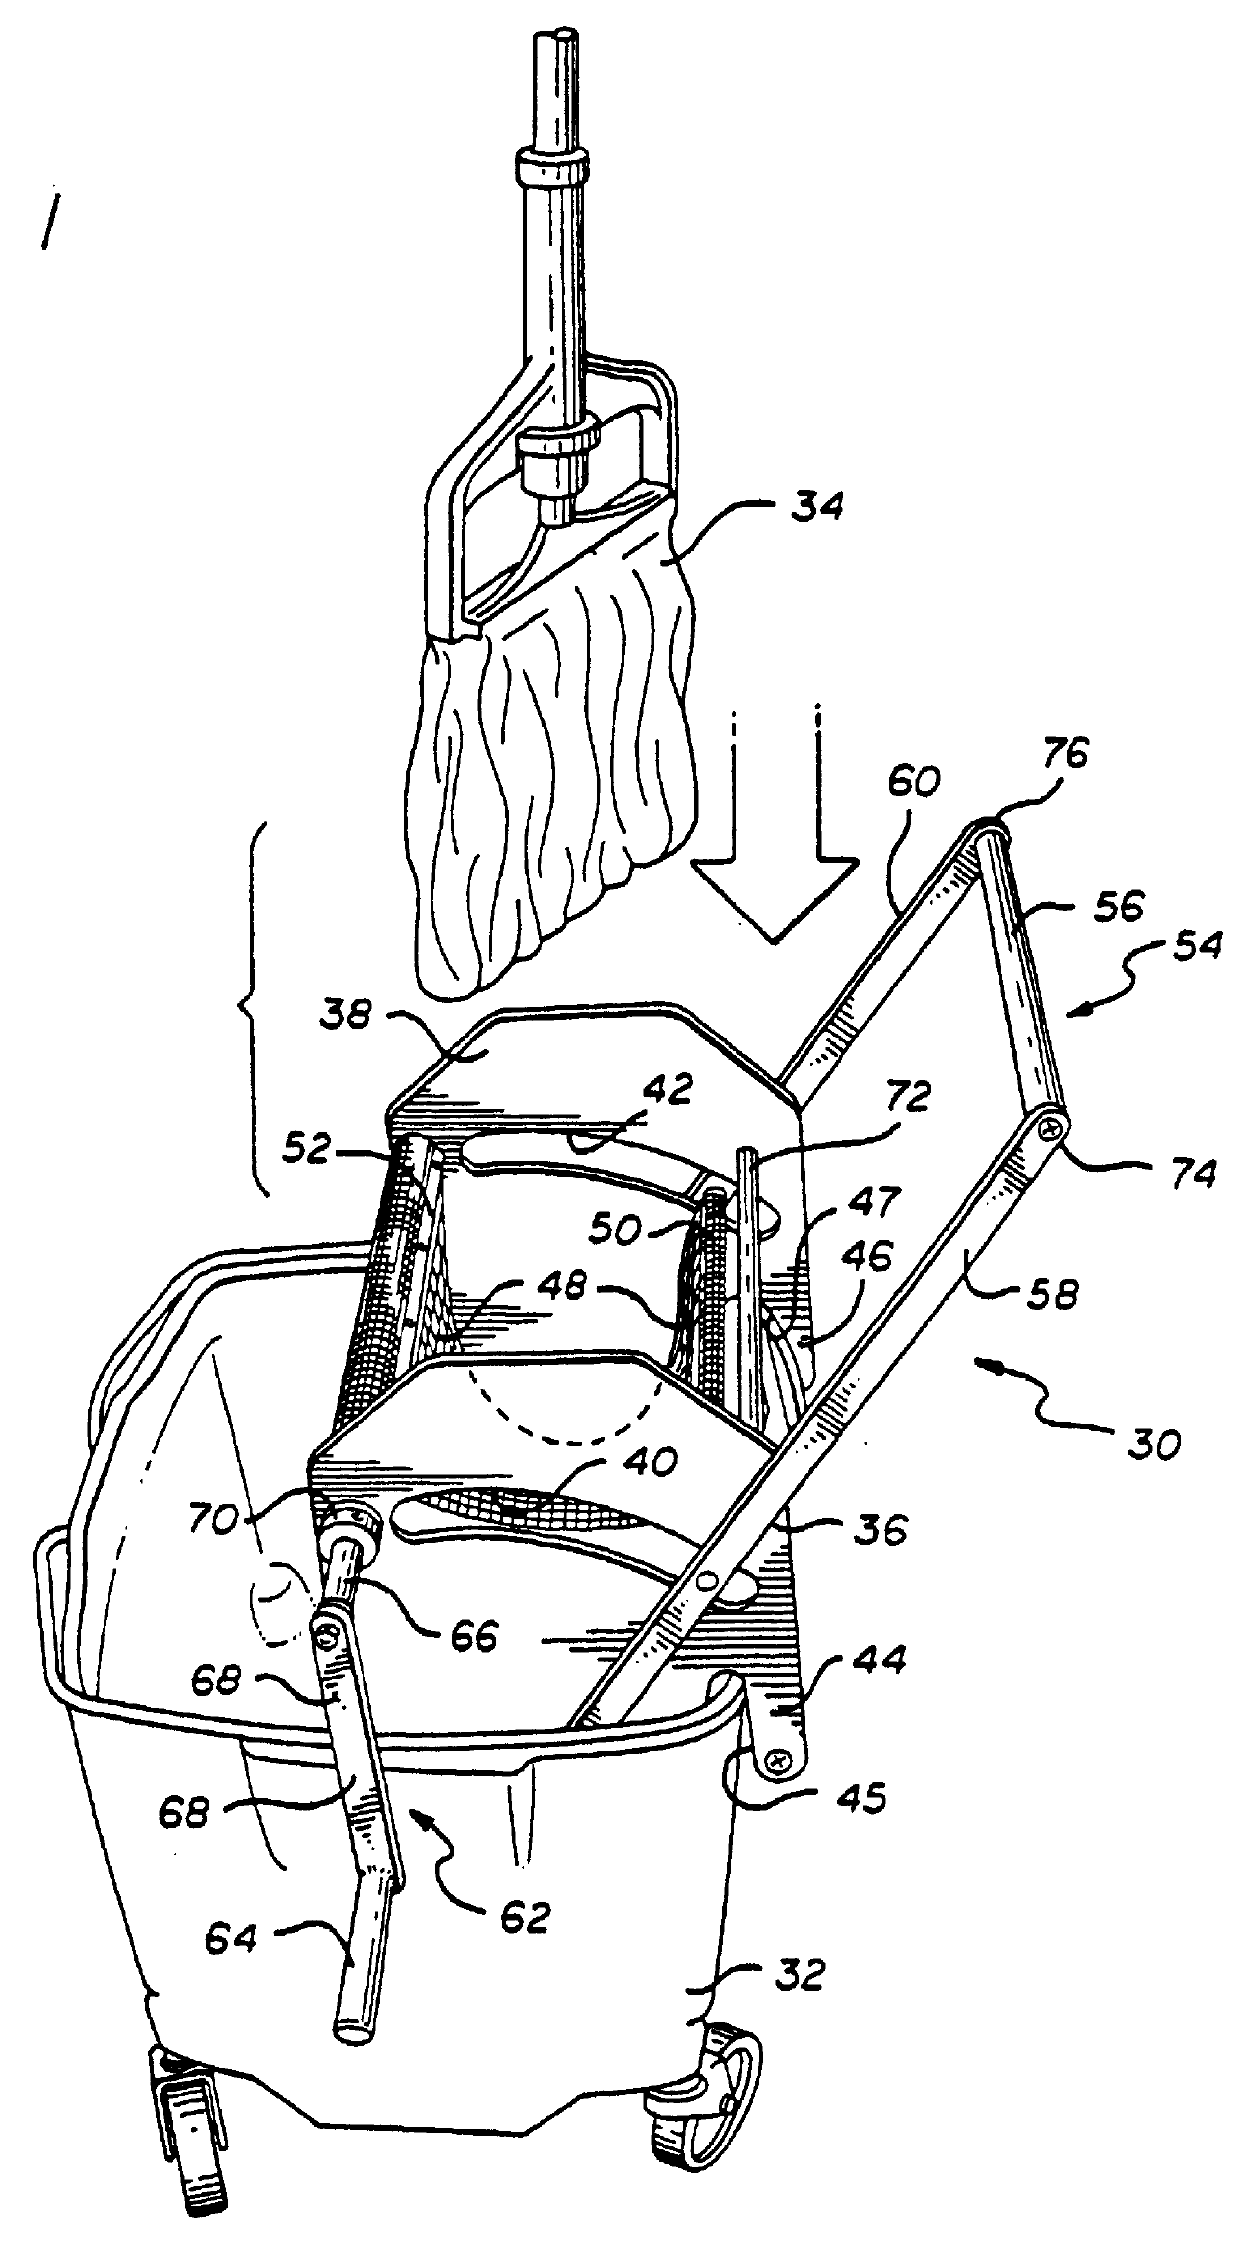 Multiple purpose wringer and method of wringing articles